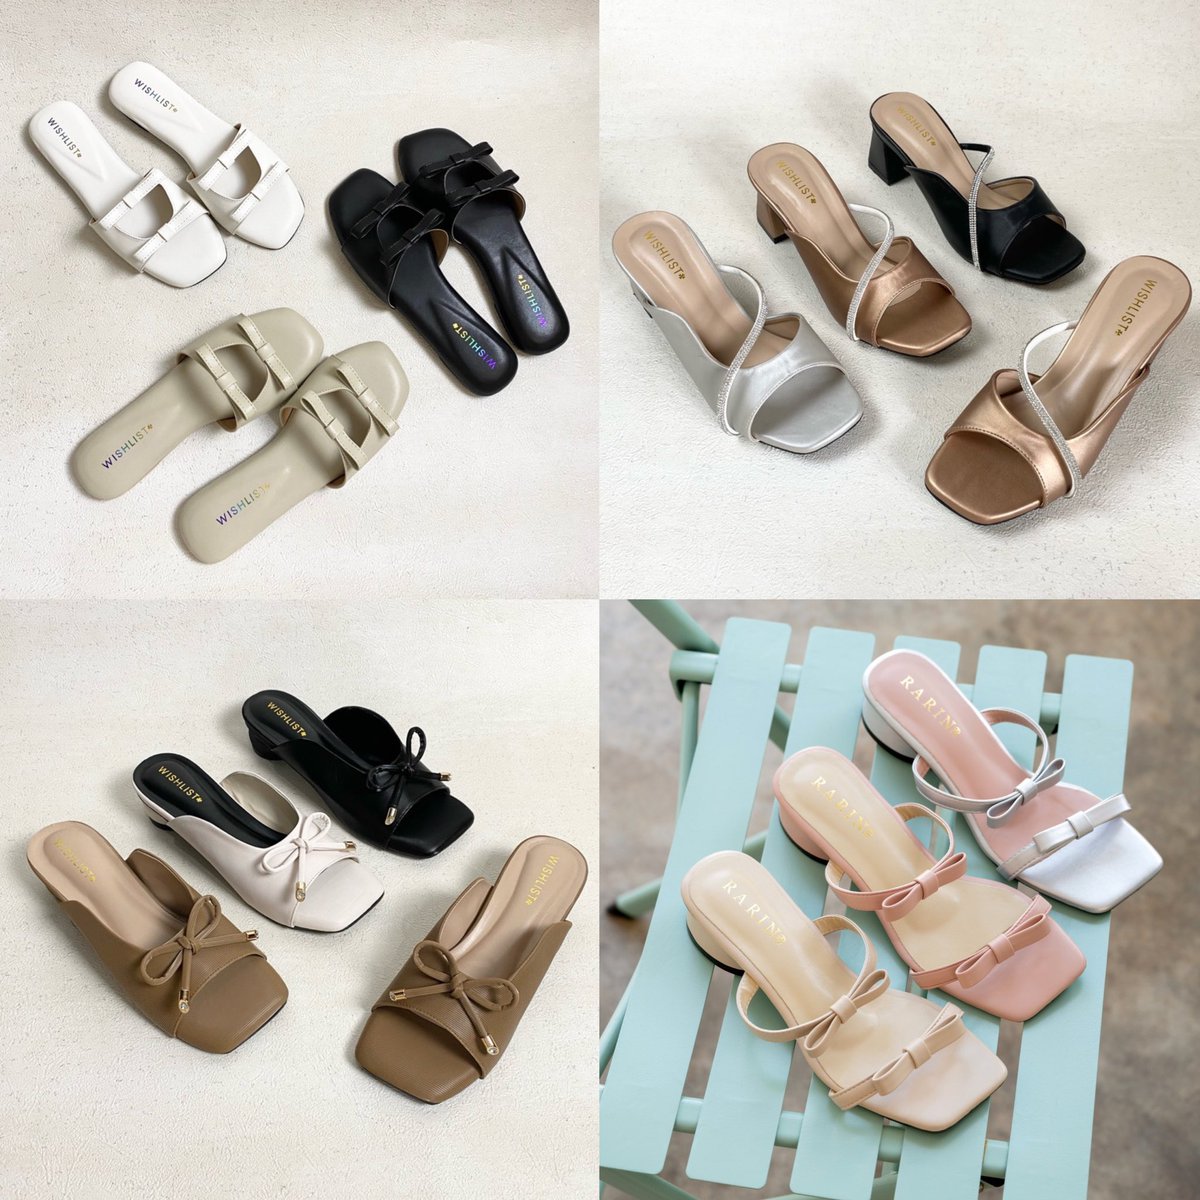 trendy shoes for the girls 🎀

- thread 
(don't forget to bookmark this!) 🔖